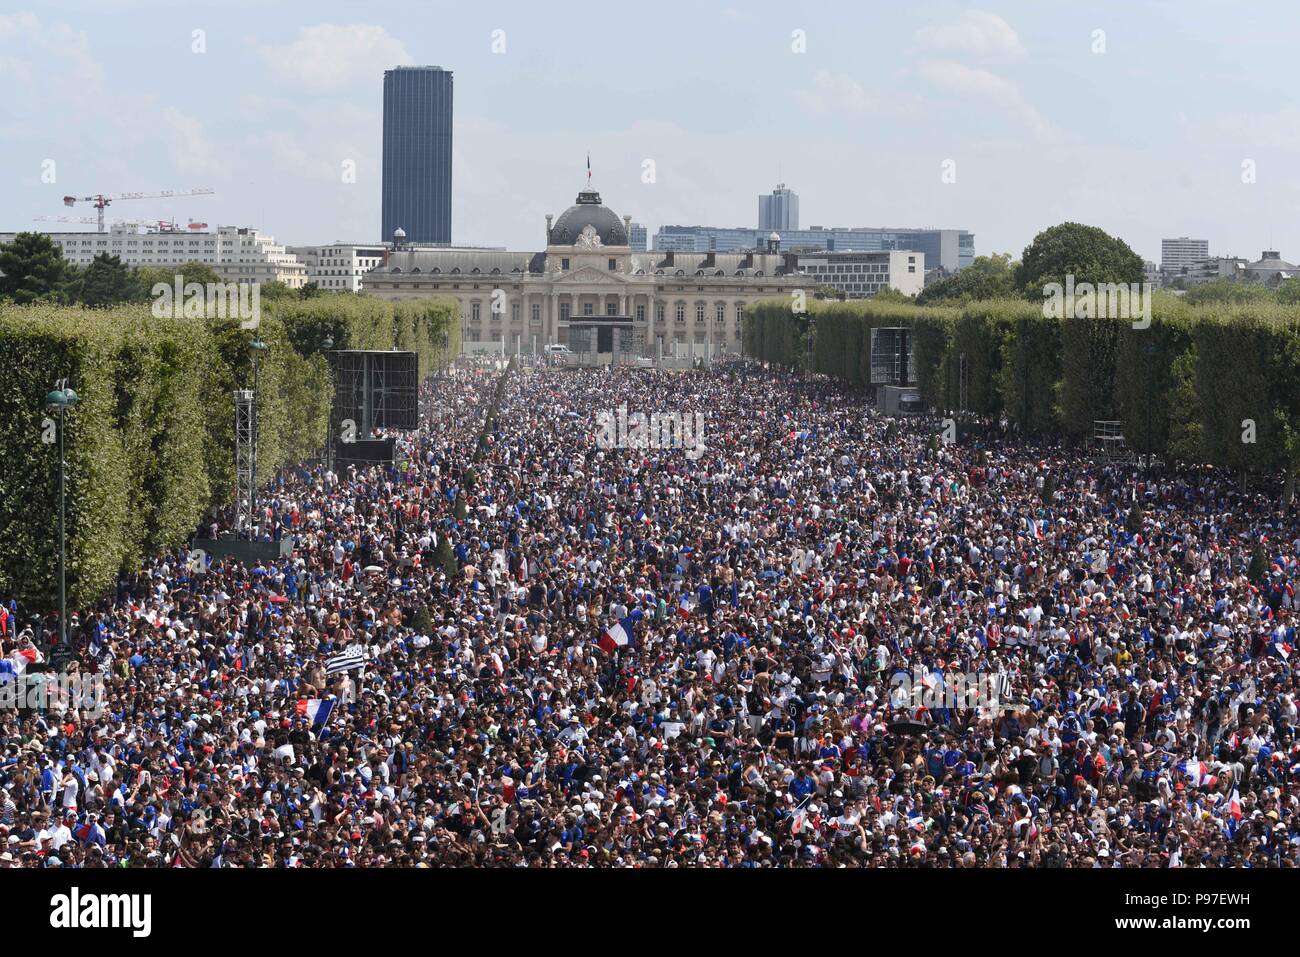 Paris, France. 15th July 2018. Supporters of the French football team  gather at the Champ-de-Mars fan zone to watch the final match of the soccer  World Cup between France and Croatia. Des